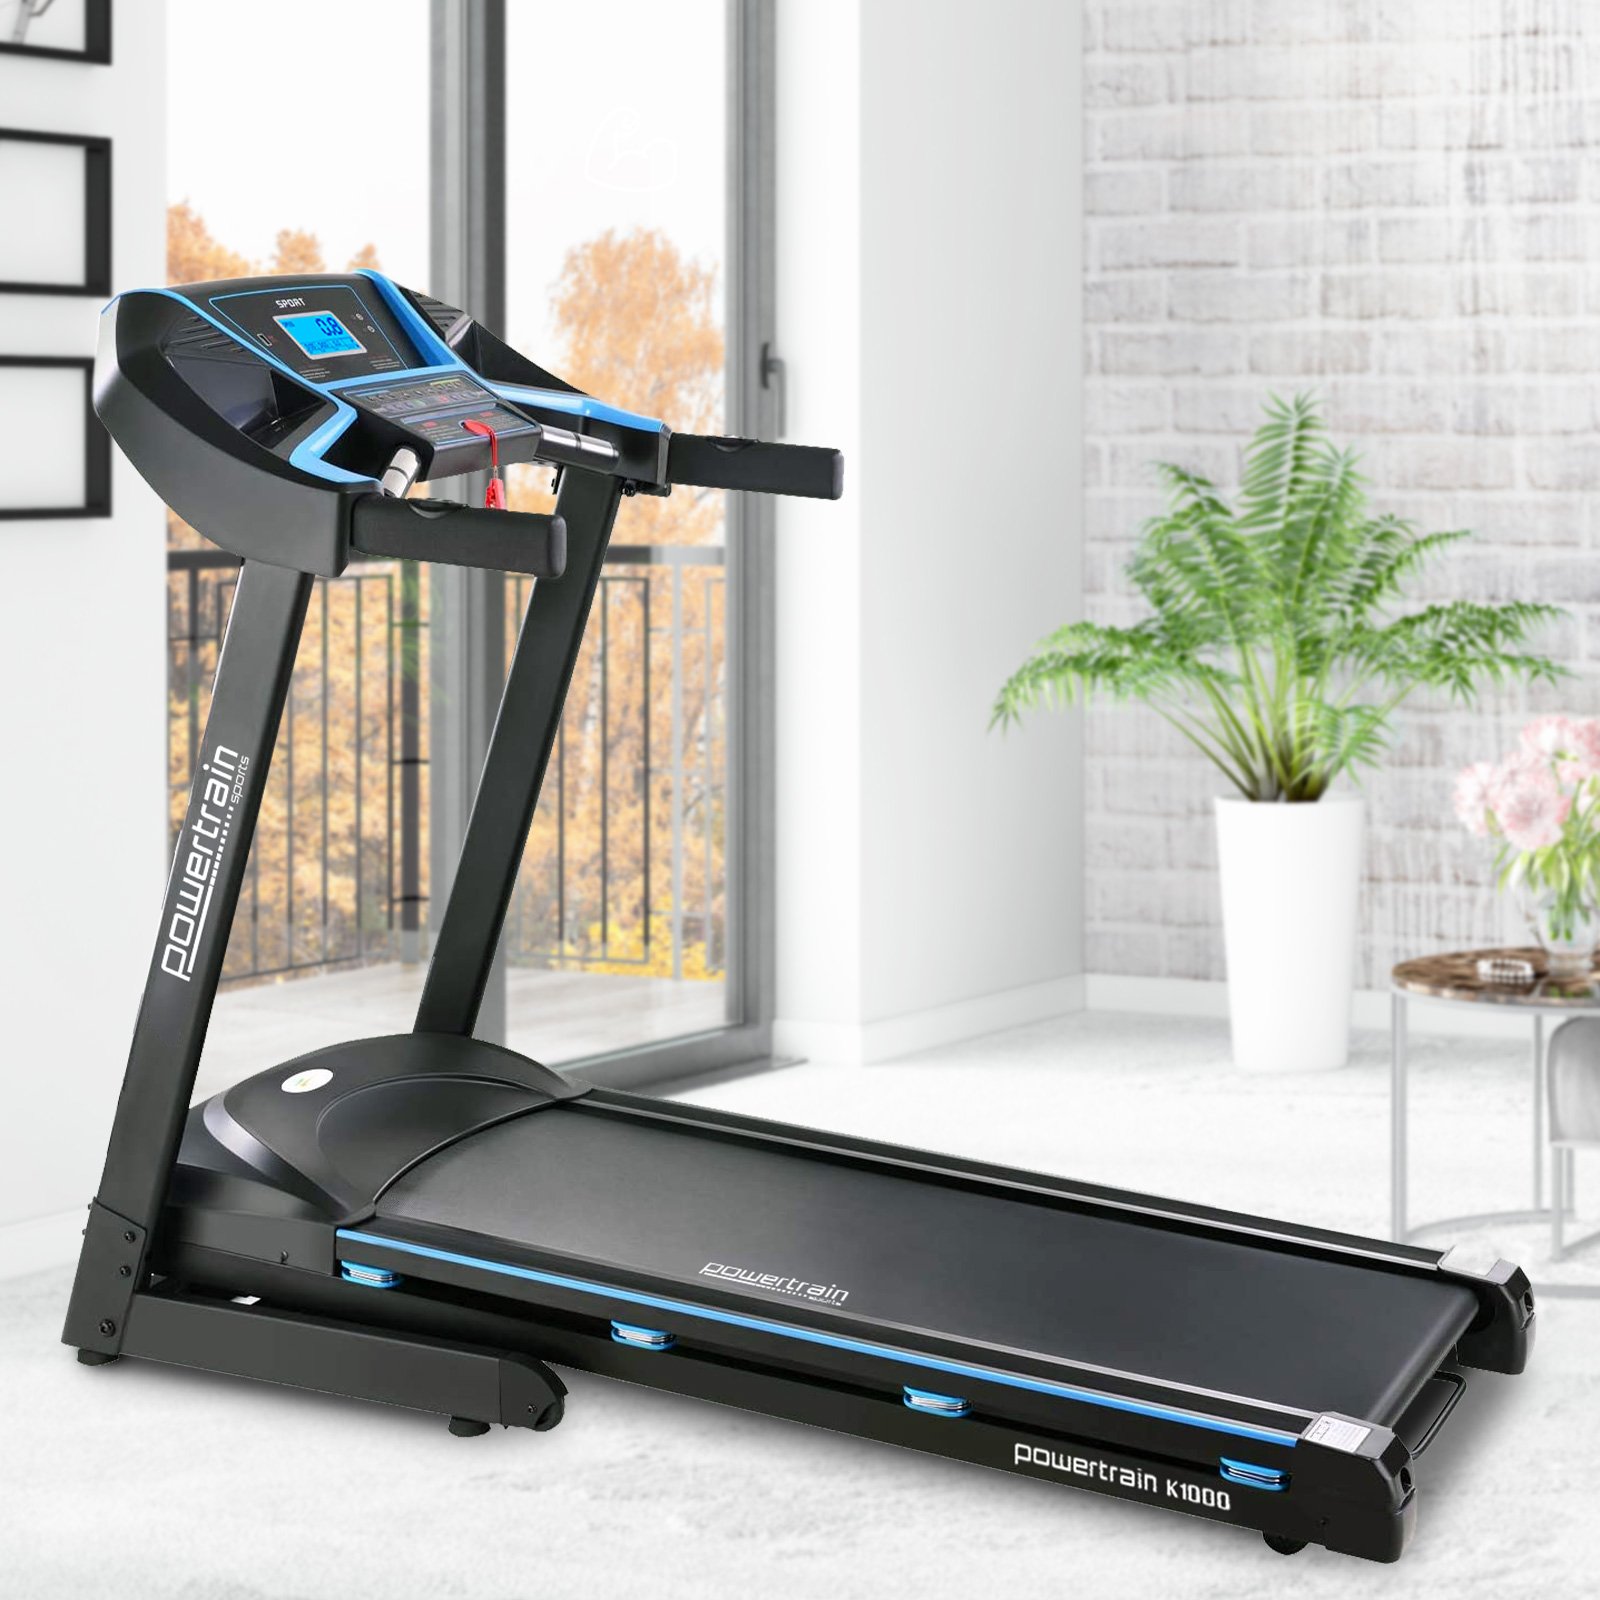 Powertrain K1000 Foldable Treadmill with Incline for Home Gym Cardio 1